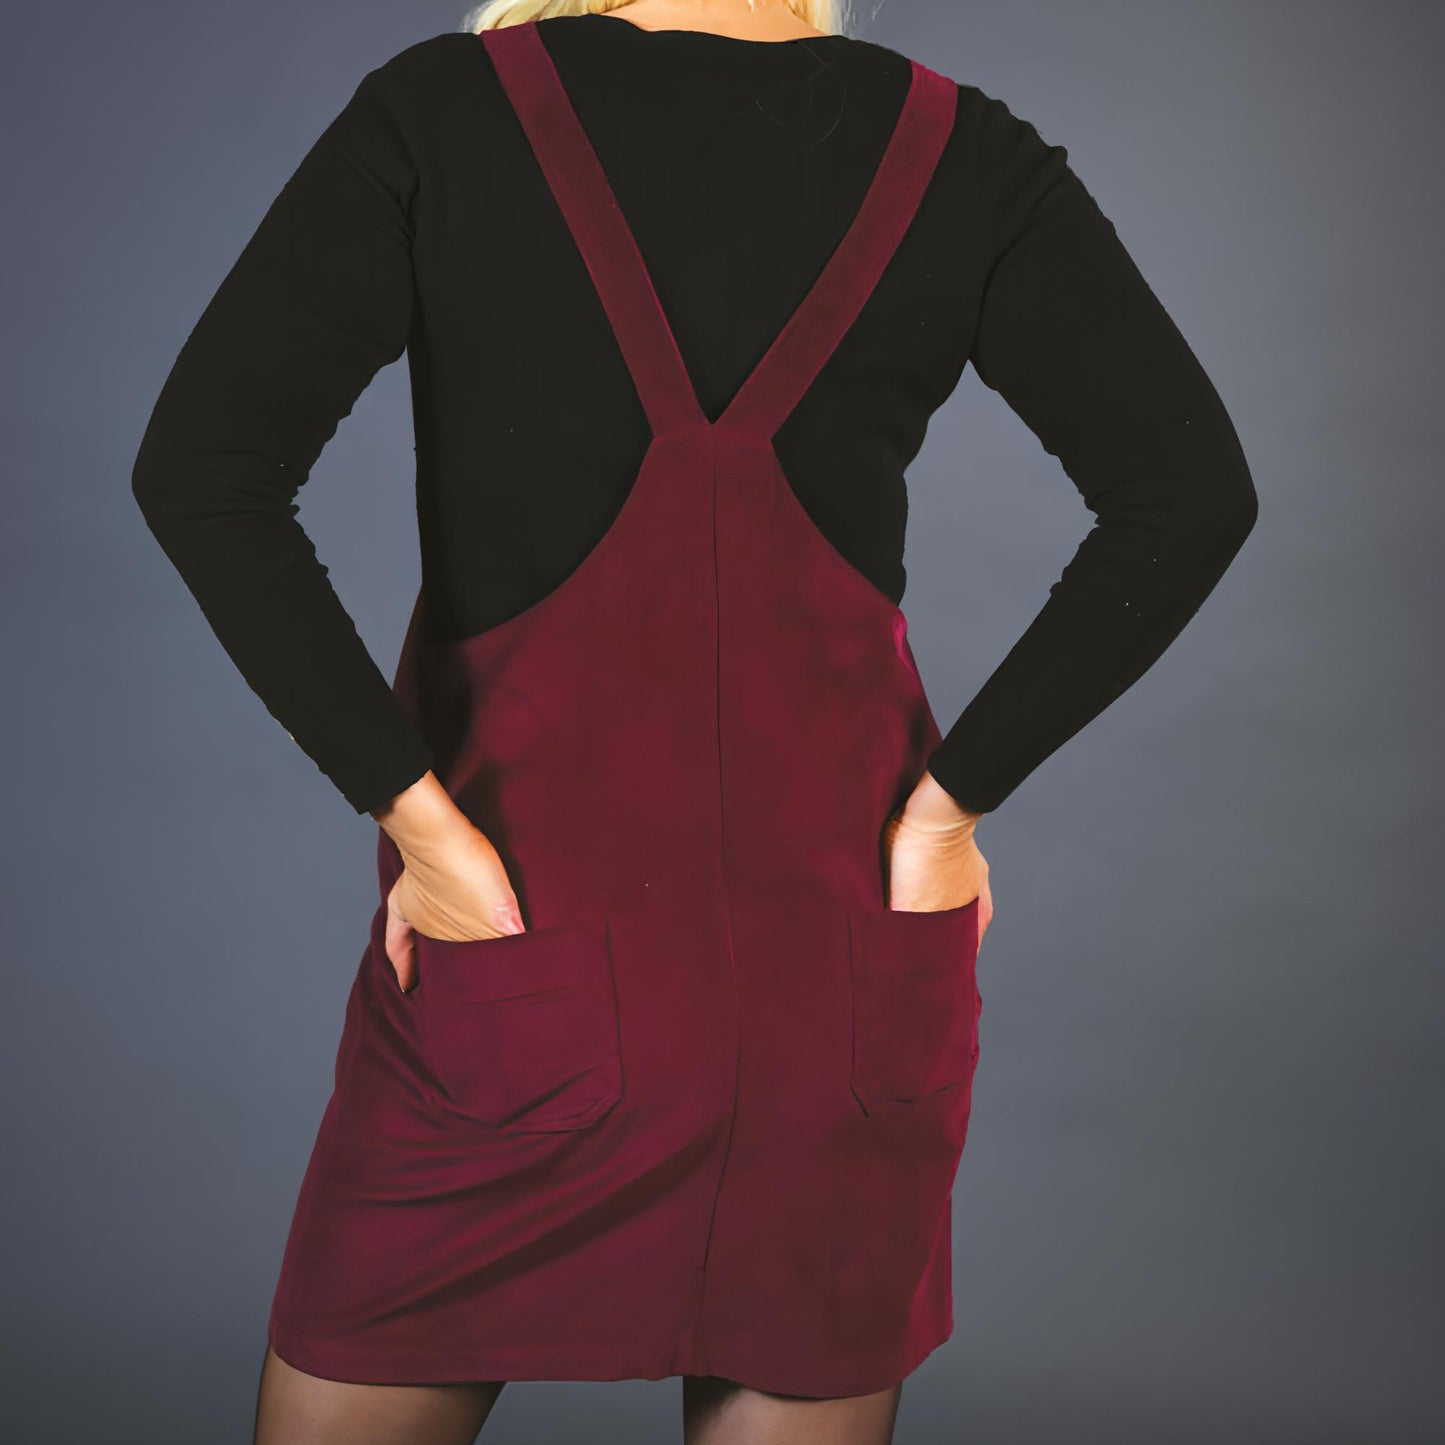 Sewing Pattern - The Grace Pinafore Dress by The Pattern Preacher